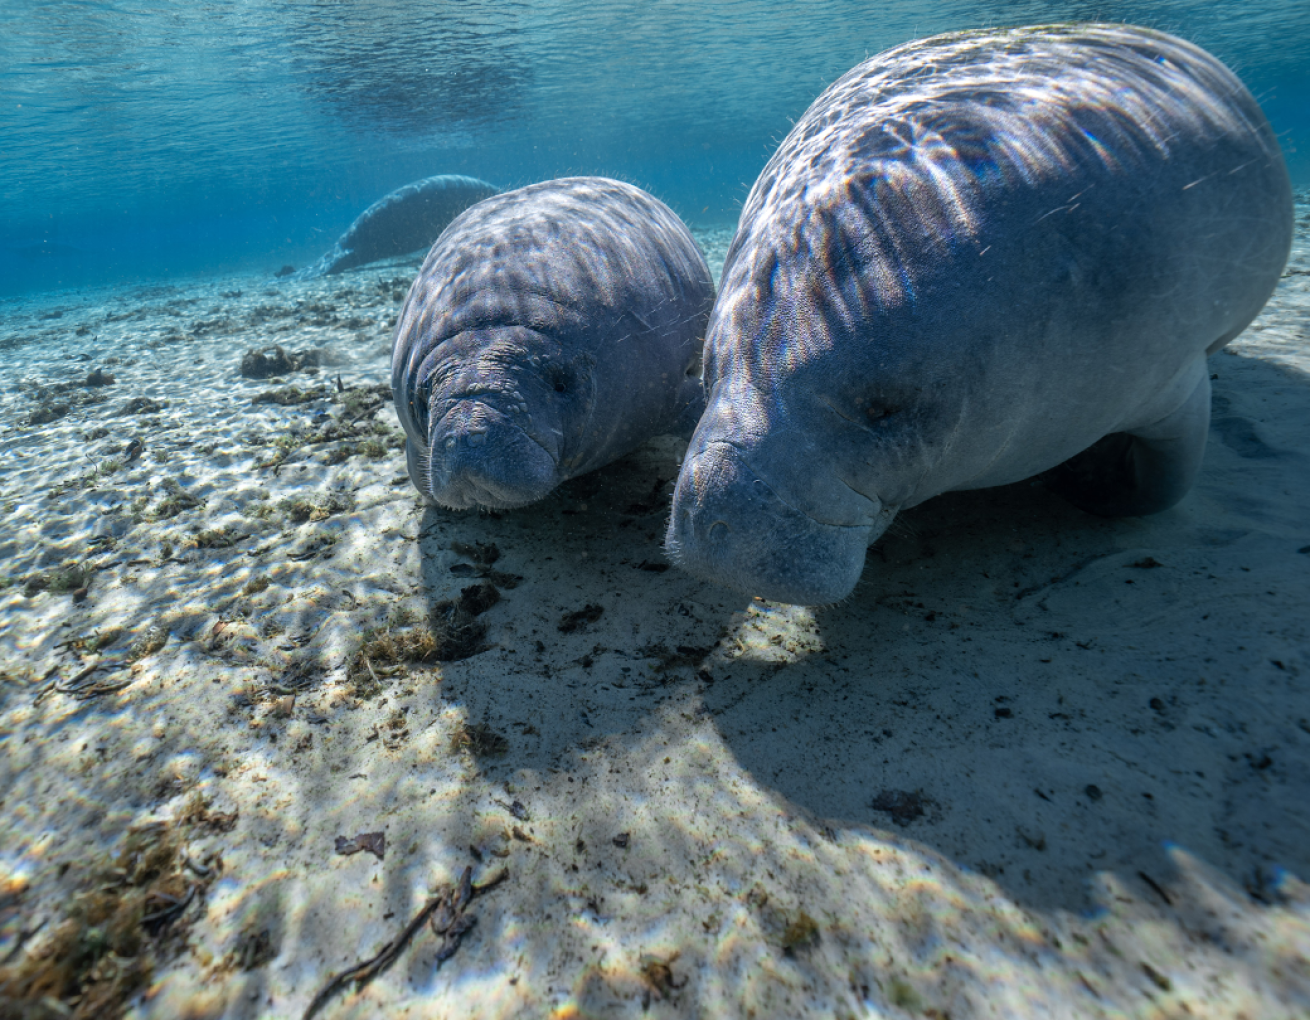 A mother and baby manatee